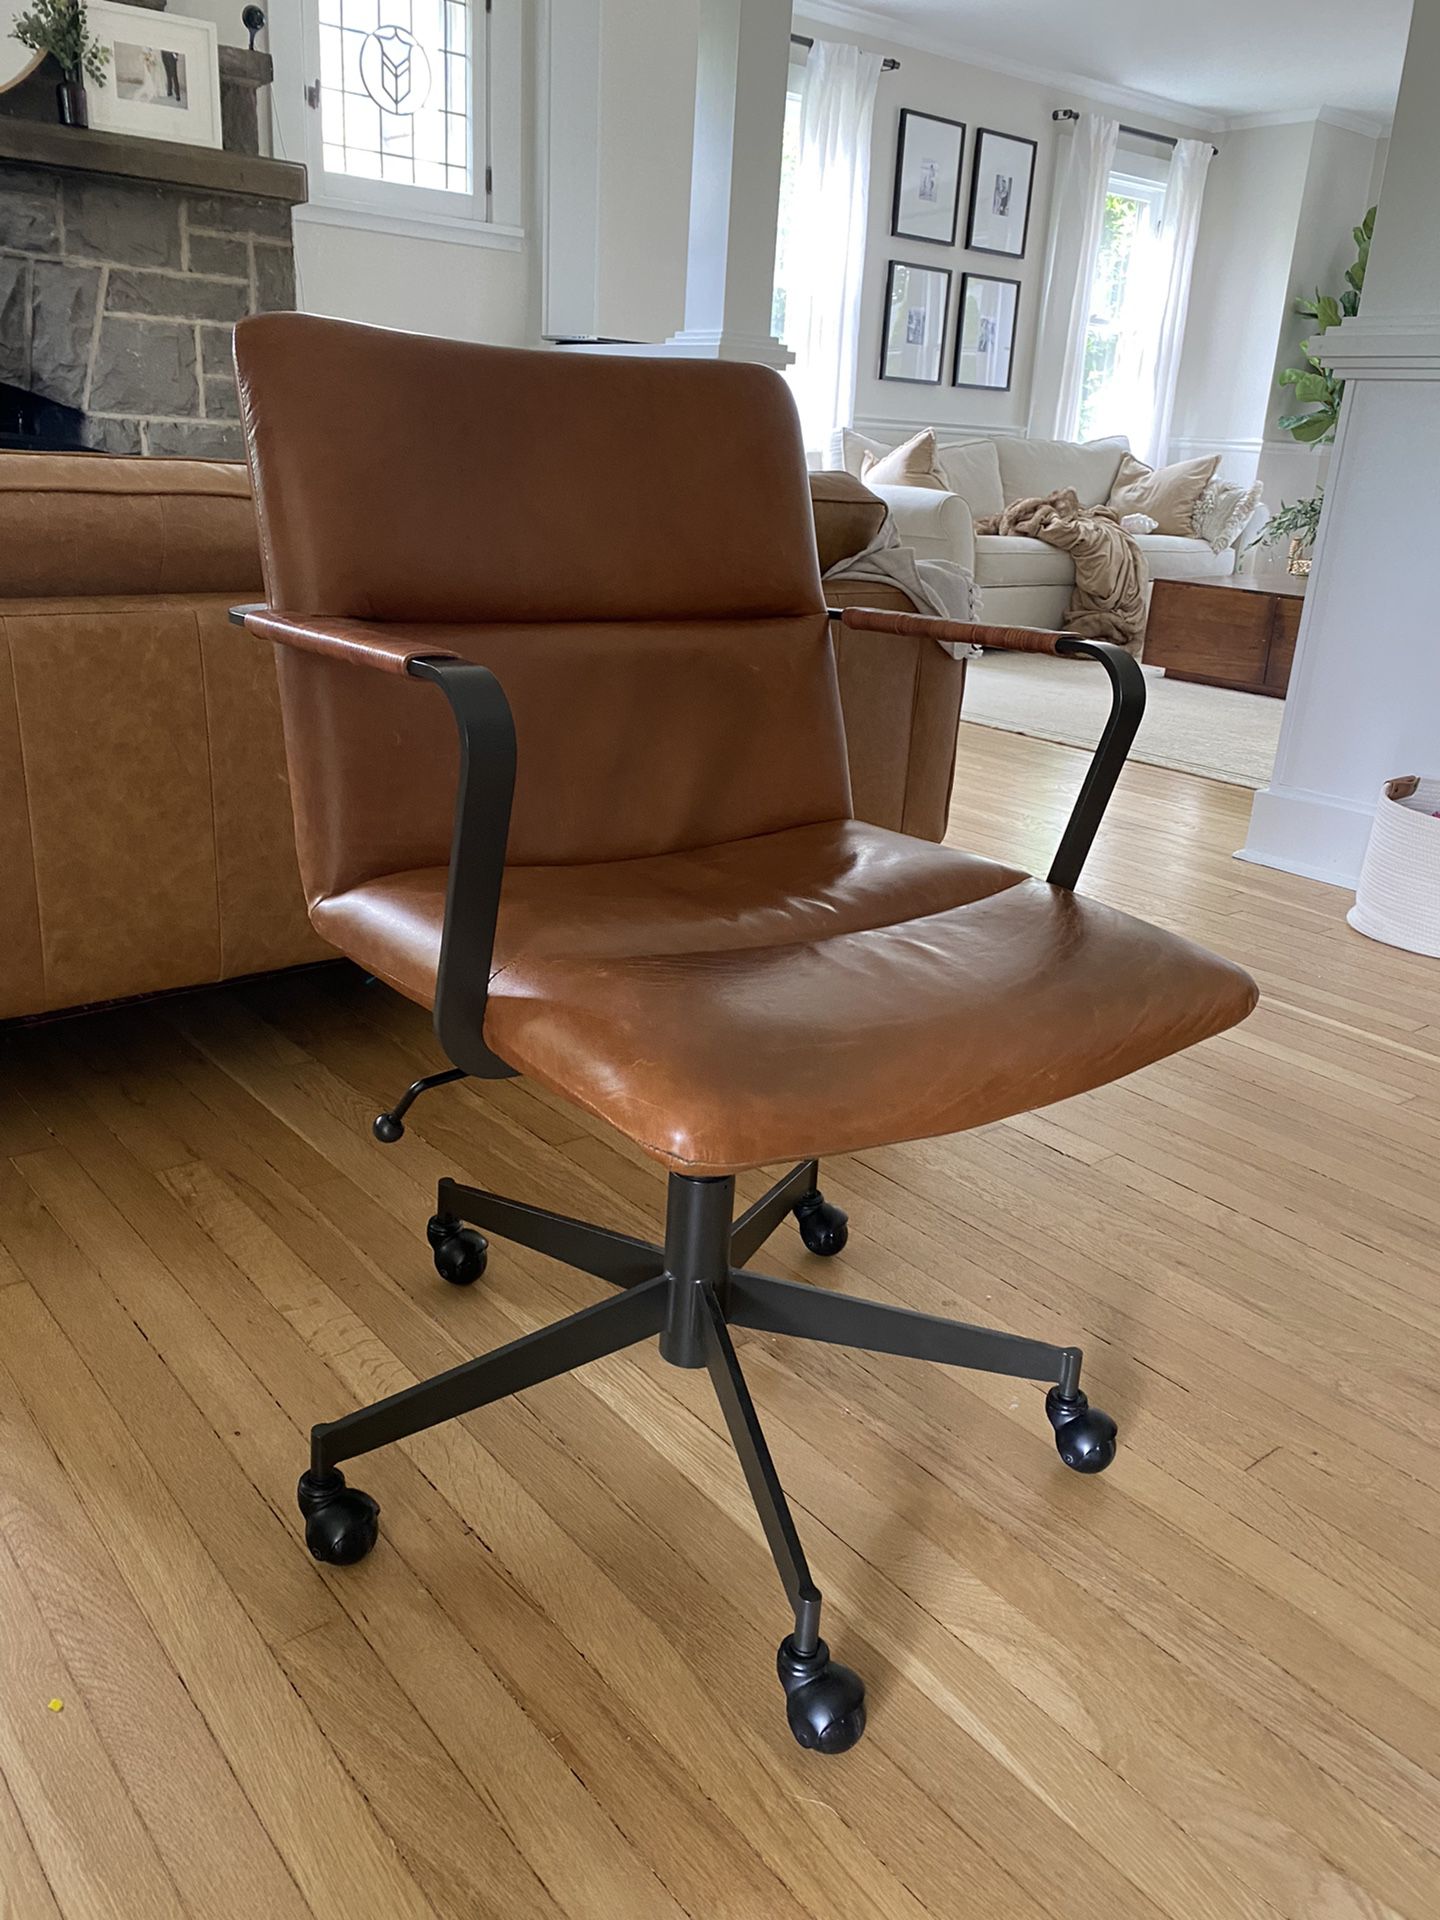 West Elm Swivel Chair - New Great Condition 